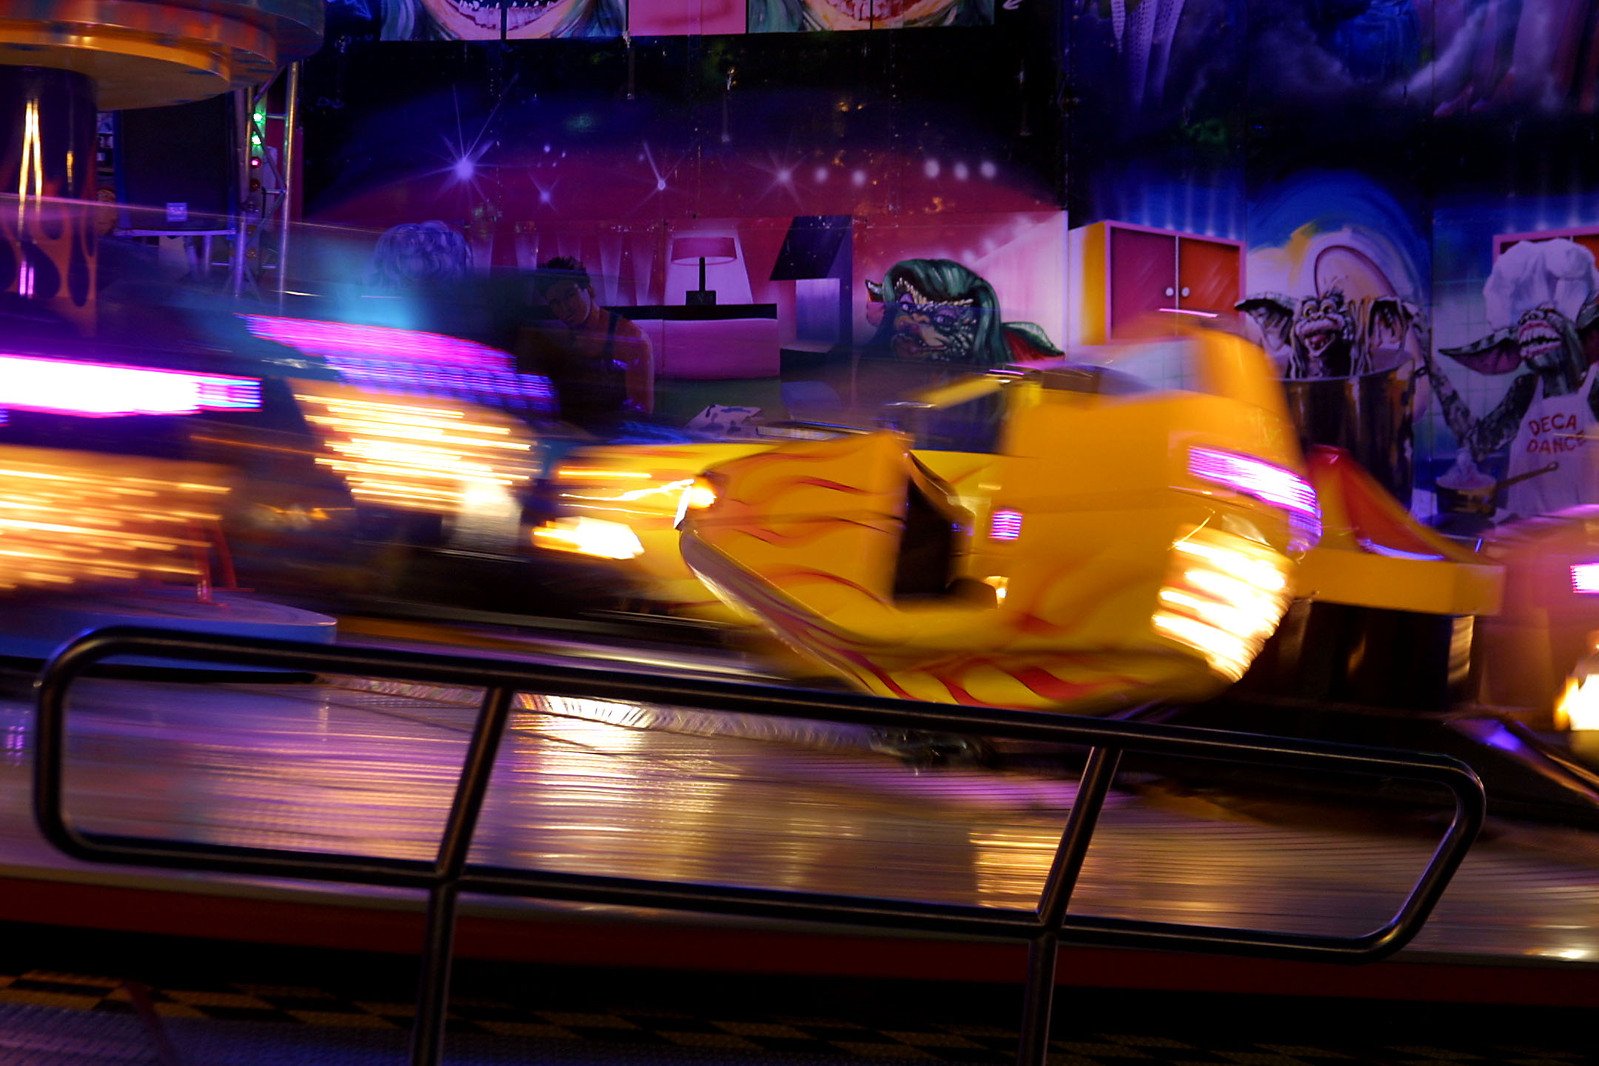 an amut rides on a ride with several cars behind it